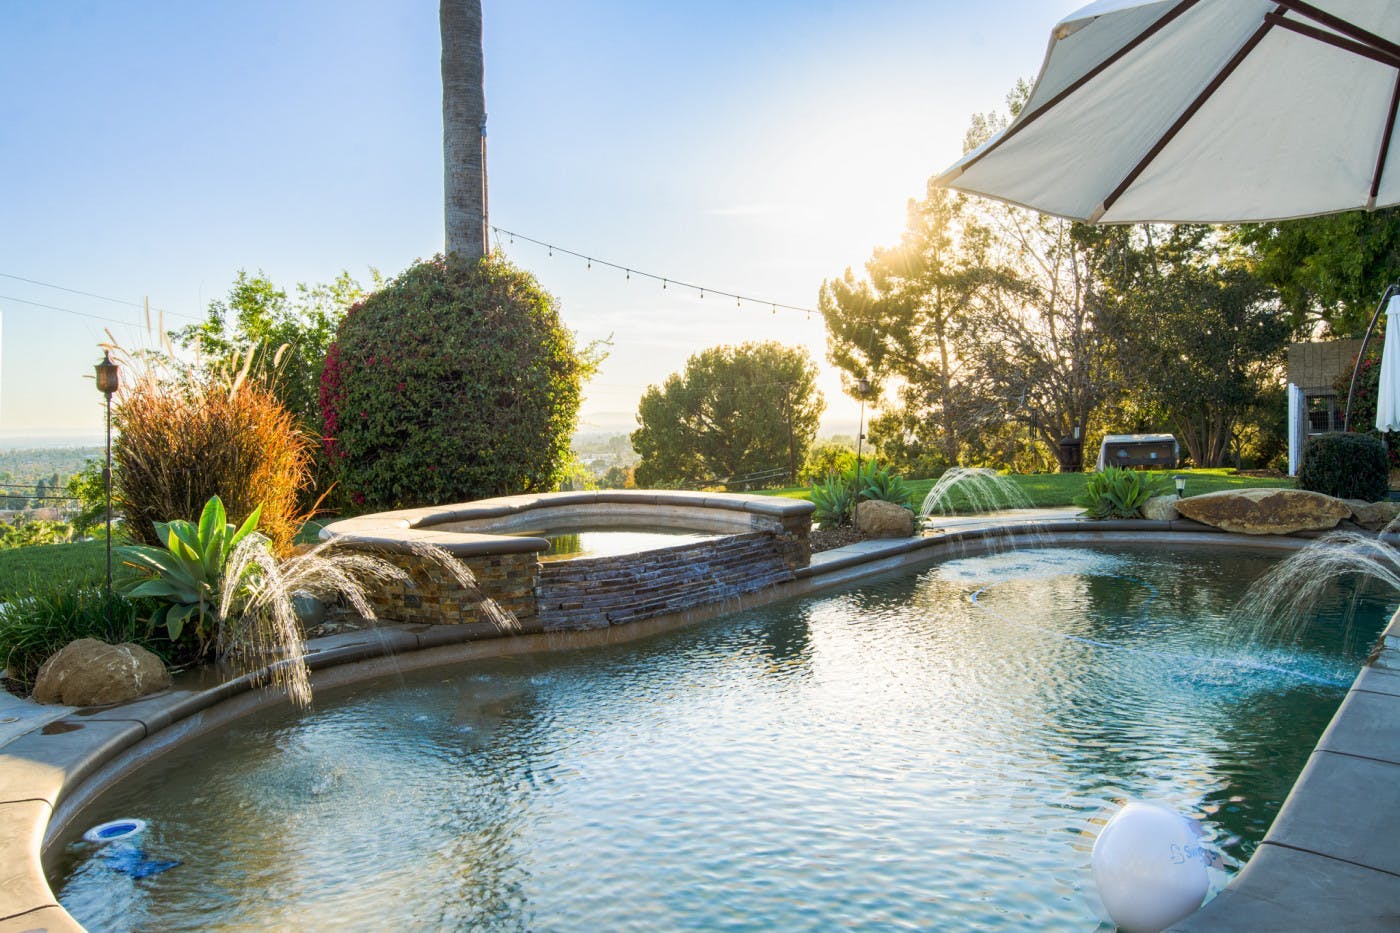 Skyline Oasis of Tranquility Heated Pool & Hot Tub